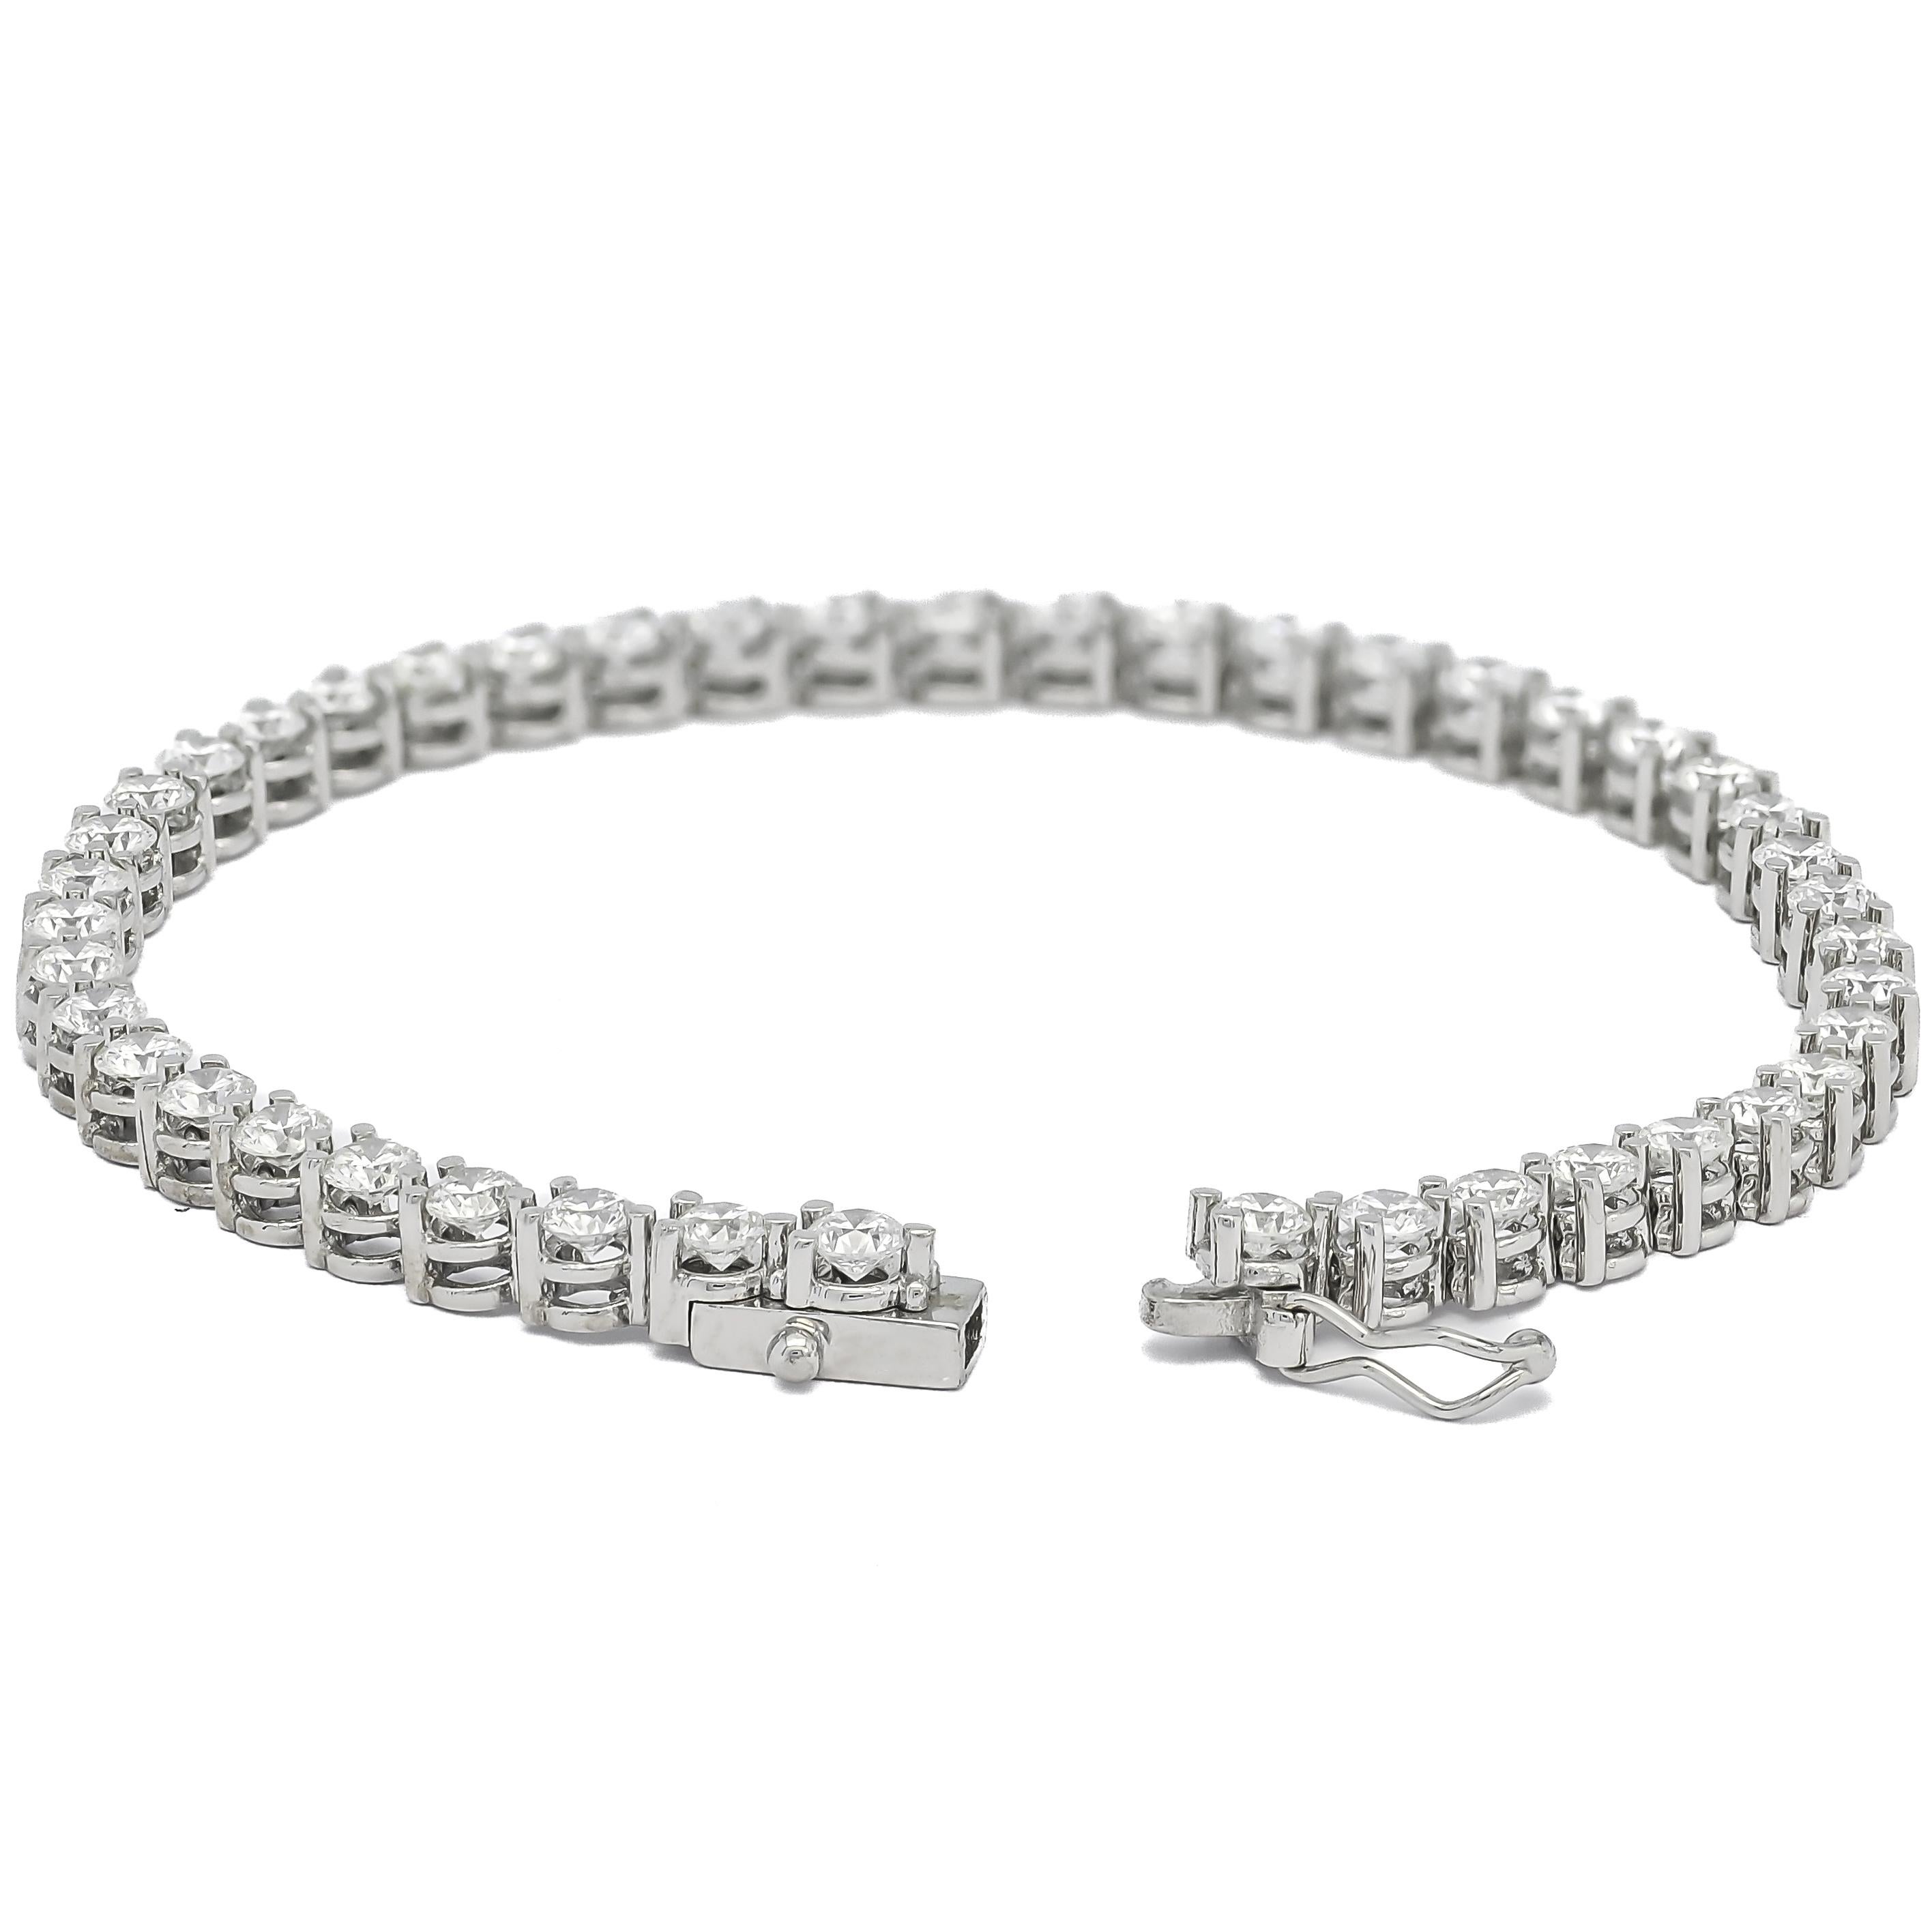 Wrap her wrist in the timeless elegance and unparalleled beauty of this round-shape diamond tennis bracelet, where each diamond is expertly claw-set in 18k white gold to showcase its brilliance and shine.

This exquisite bracelet features a seamless